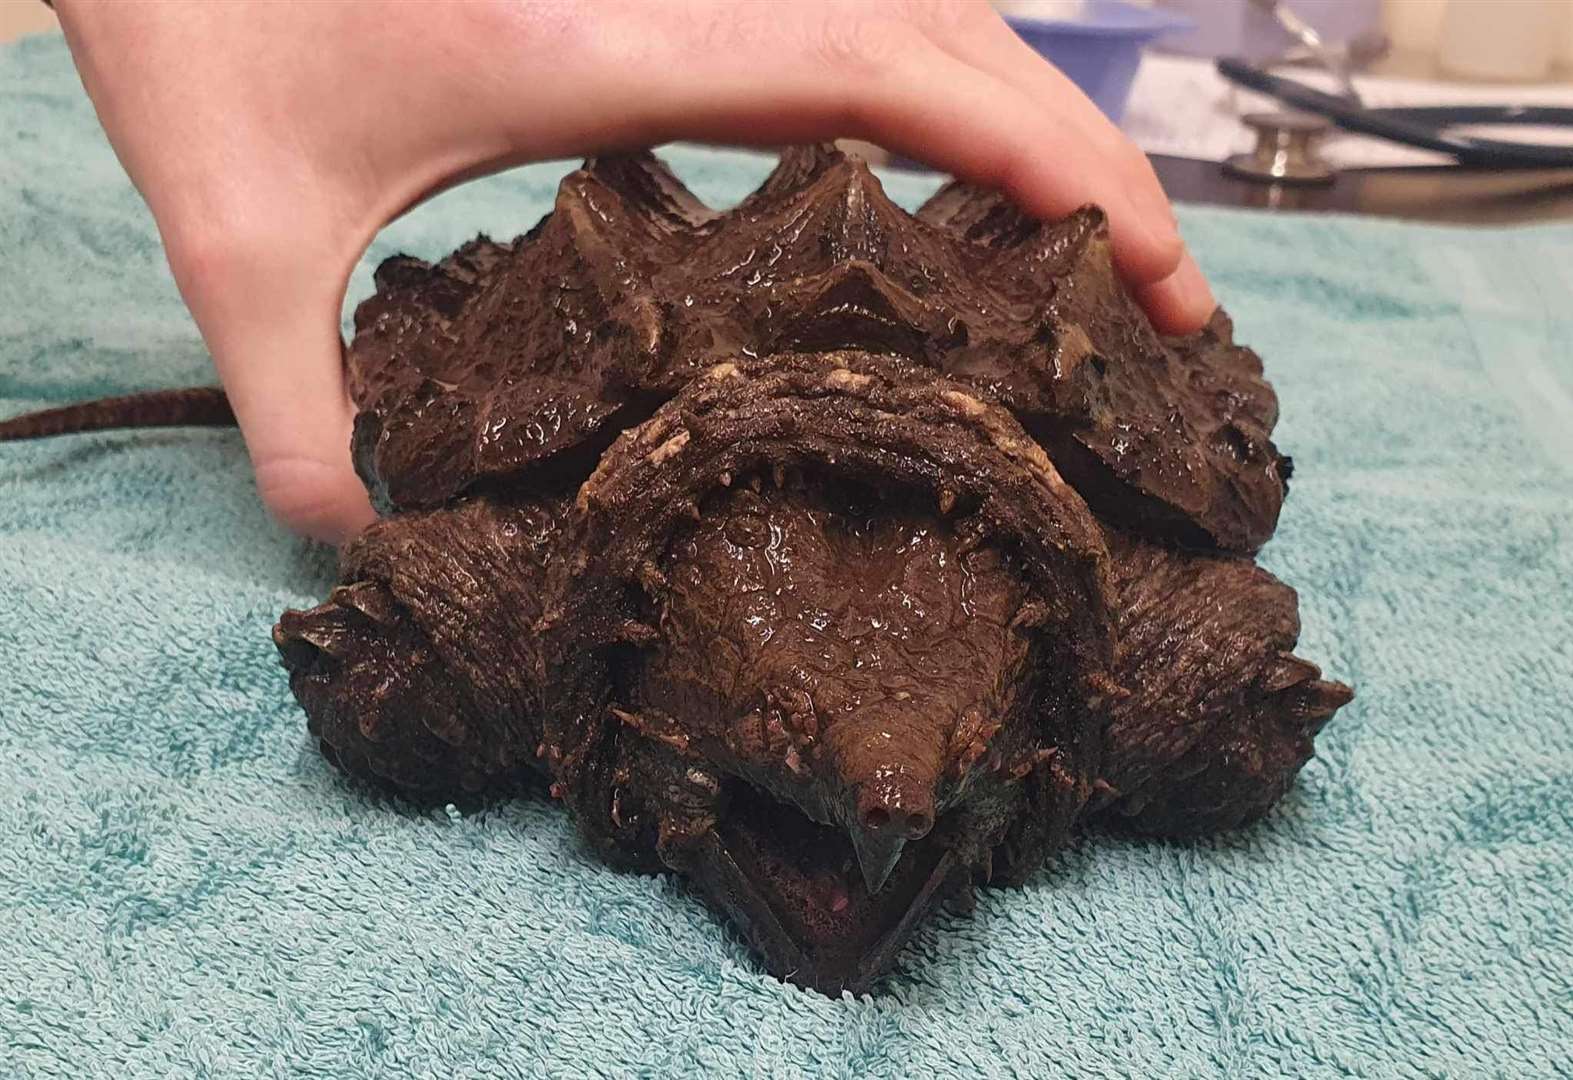 Fluffy, the alligator snapping turtle, will be relocated to a specialist reptile centre in Cornwall (Wild Side Vets/PA)